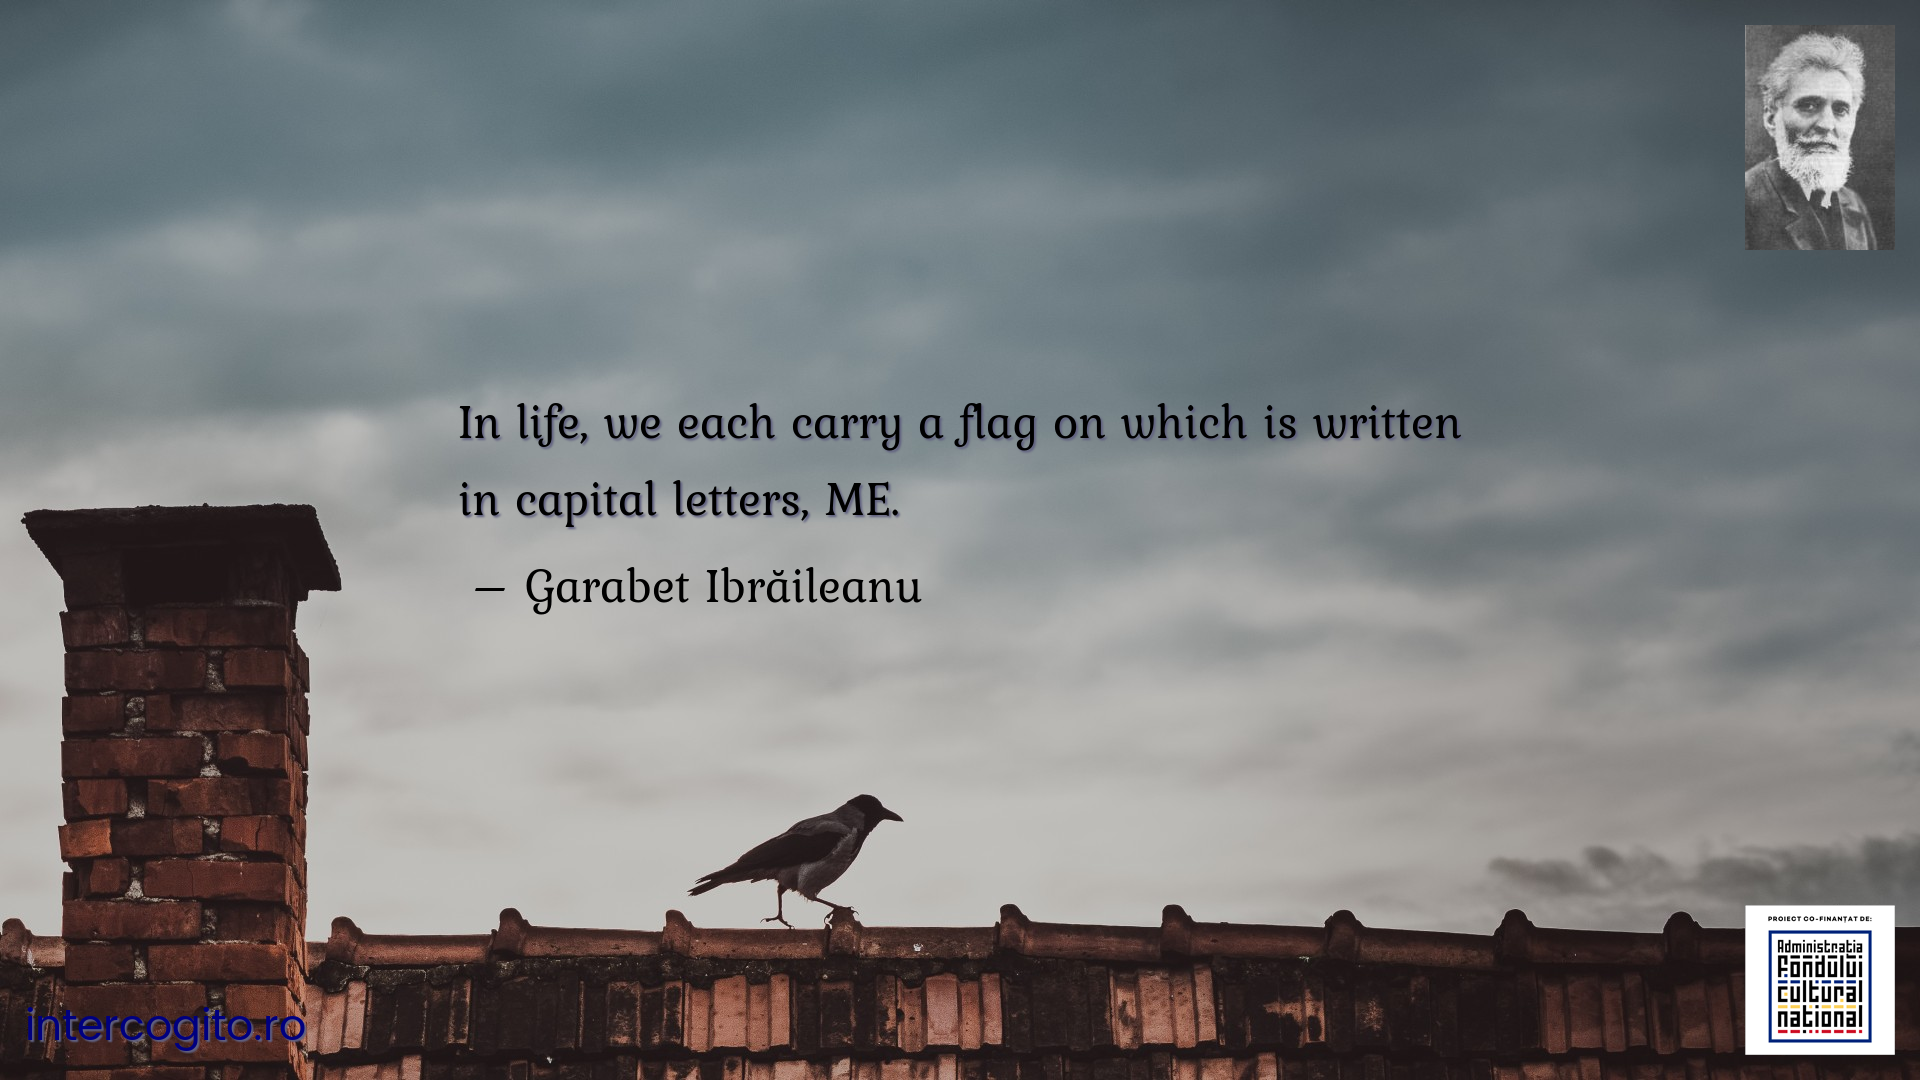 In life, we each carry a flag on which is written in capital letters, ME.